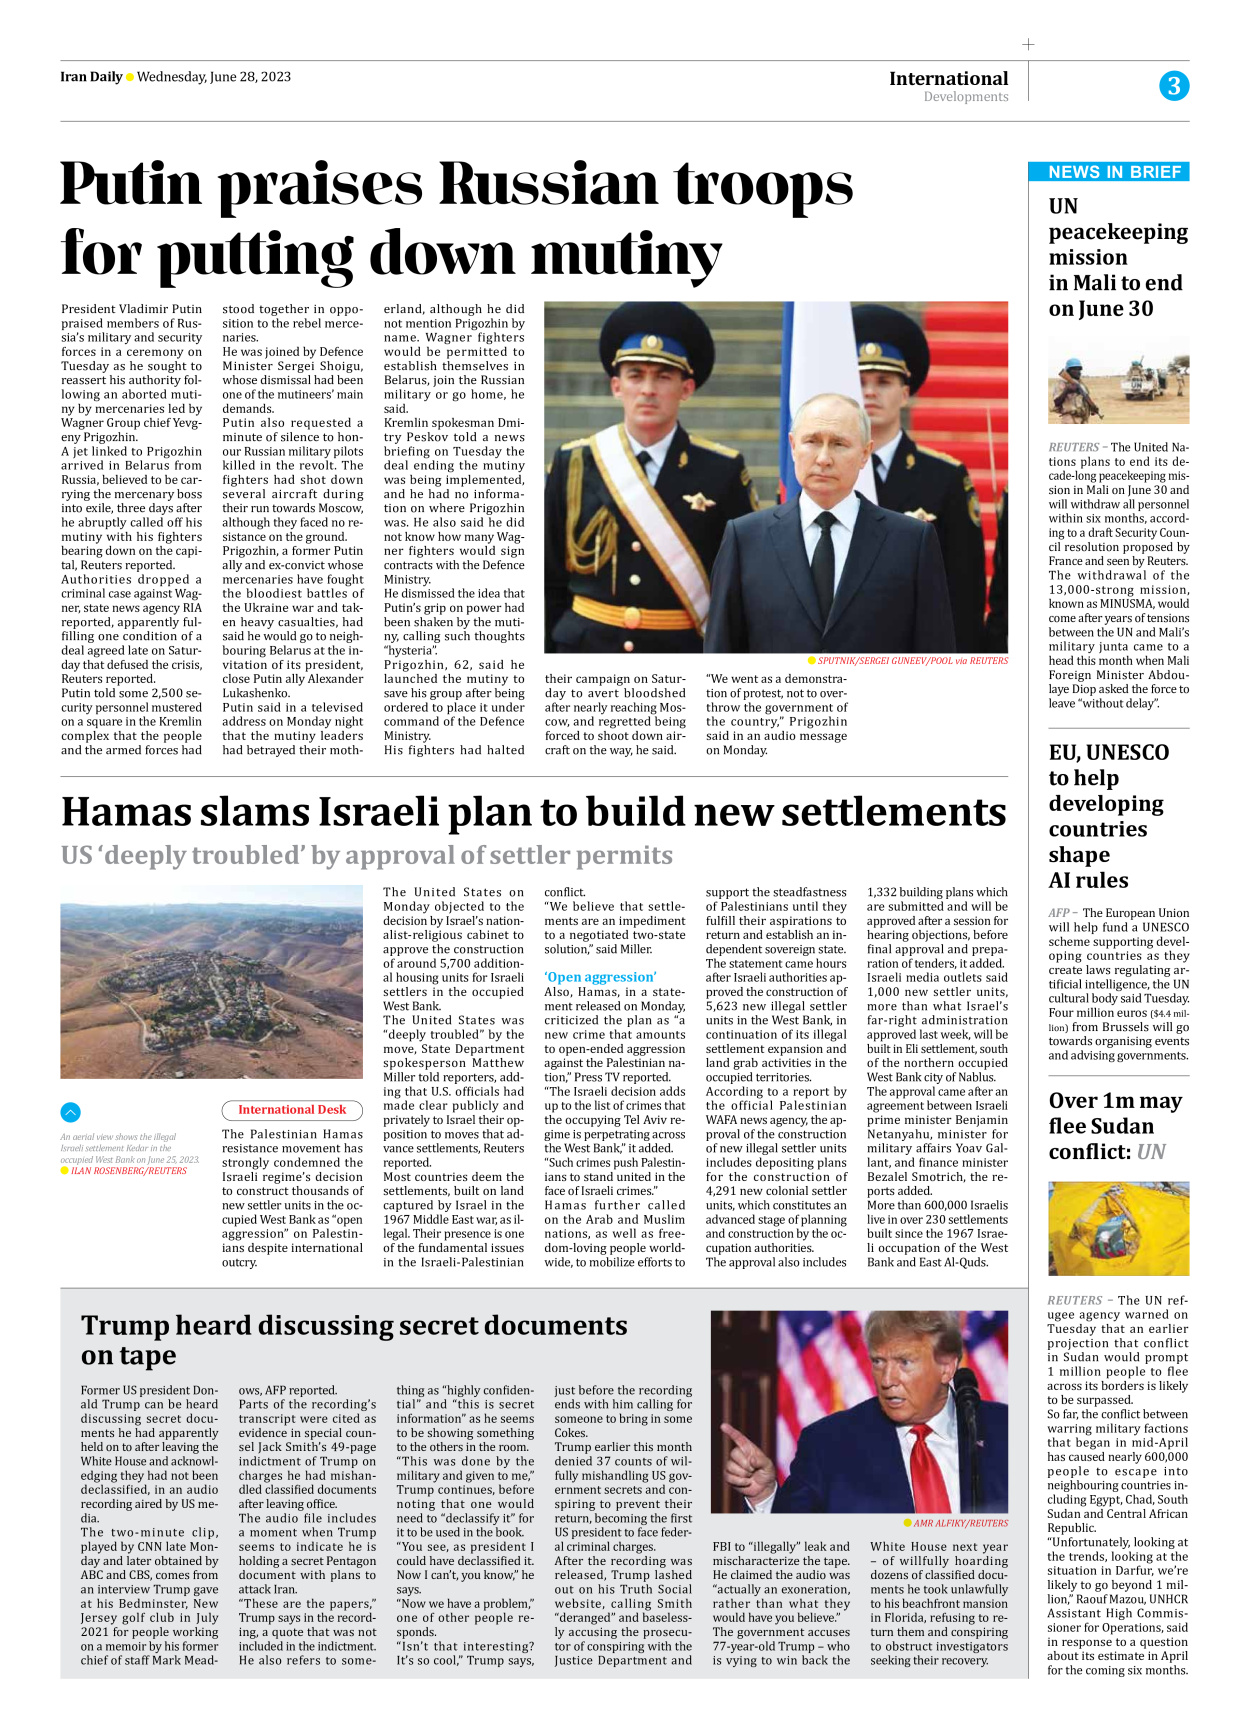 Iran Daily - Number Seven Thousand Three Hundred and Twenty Six - 28 June 2023 - Page 3